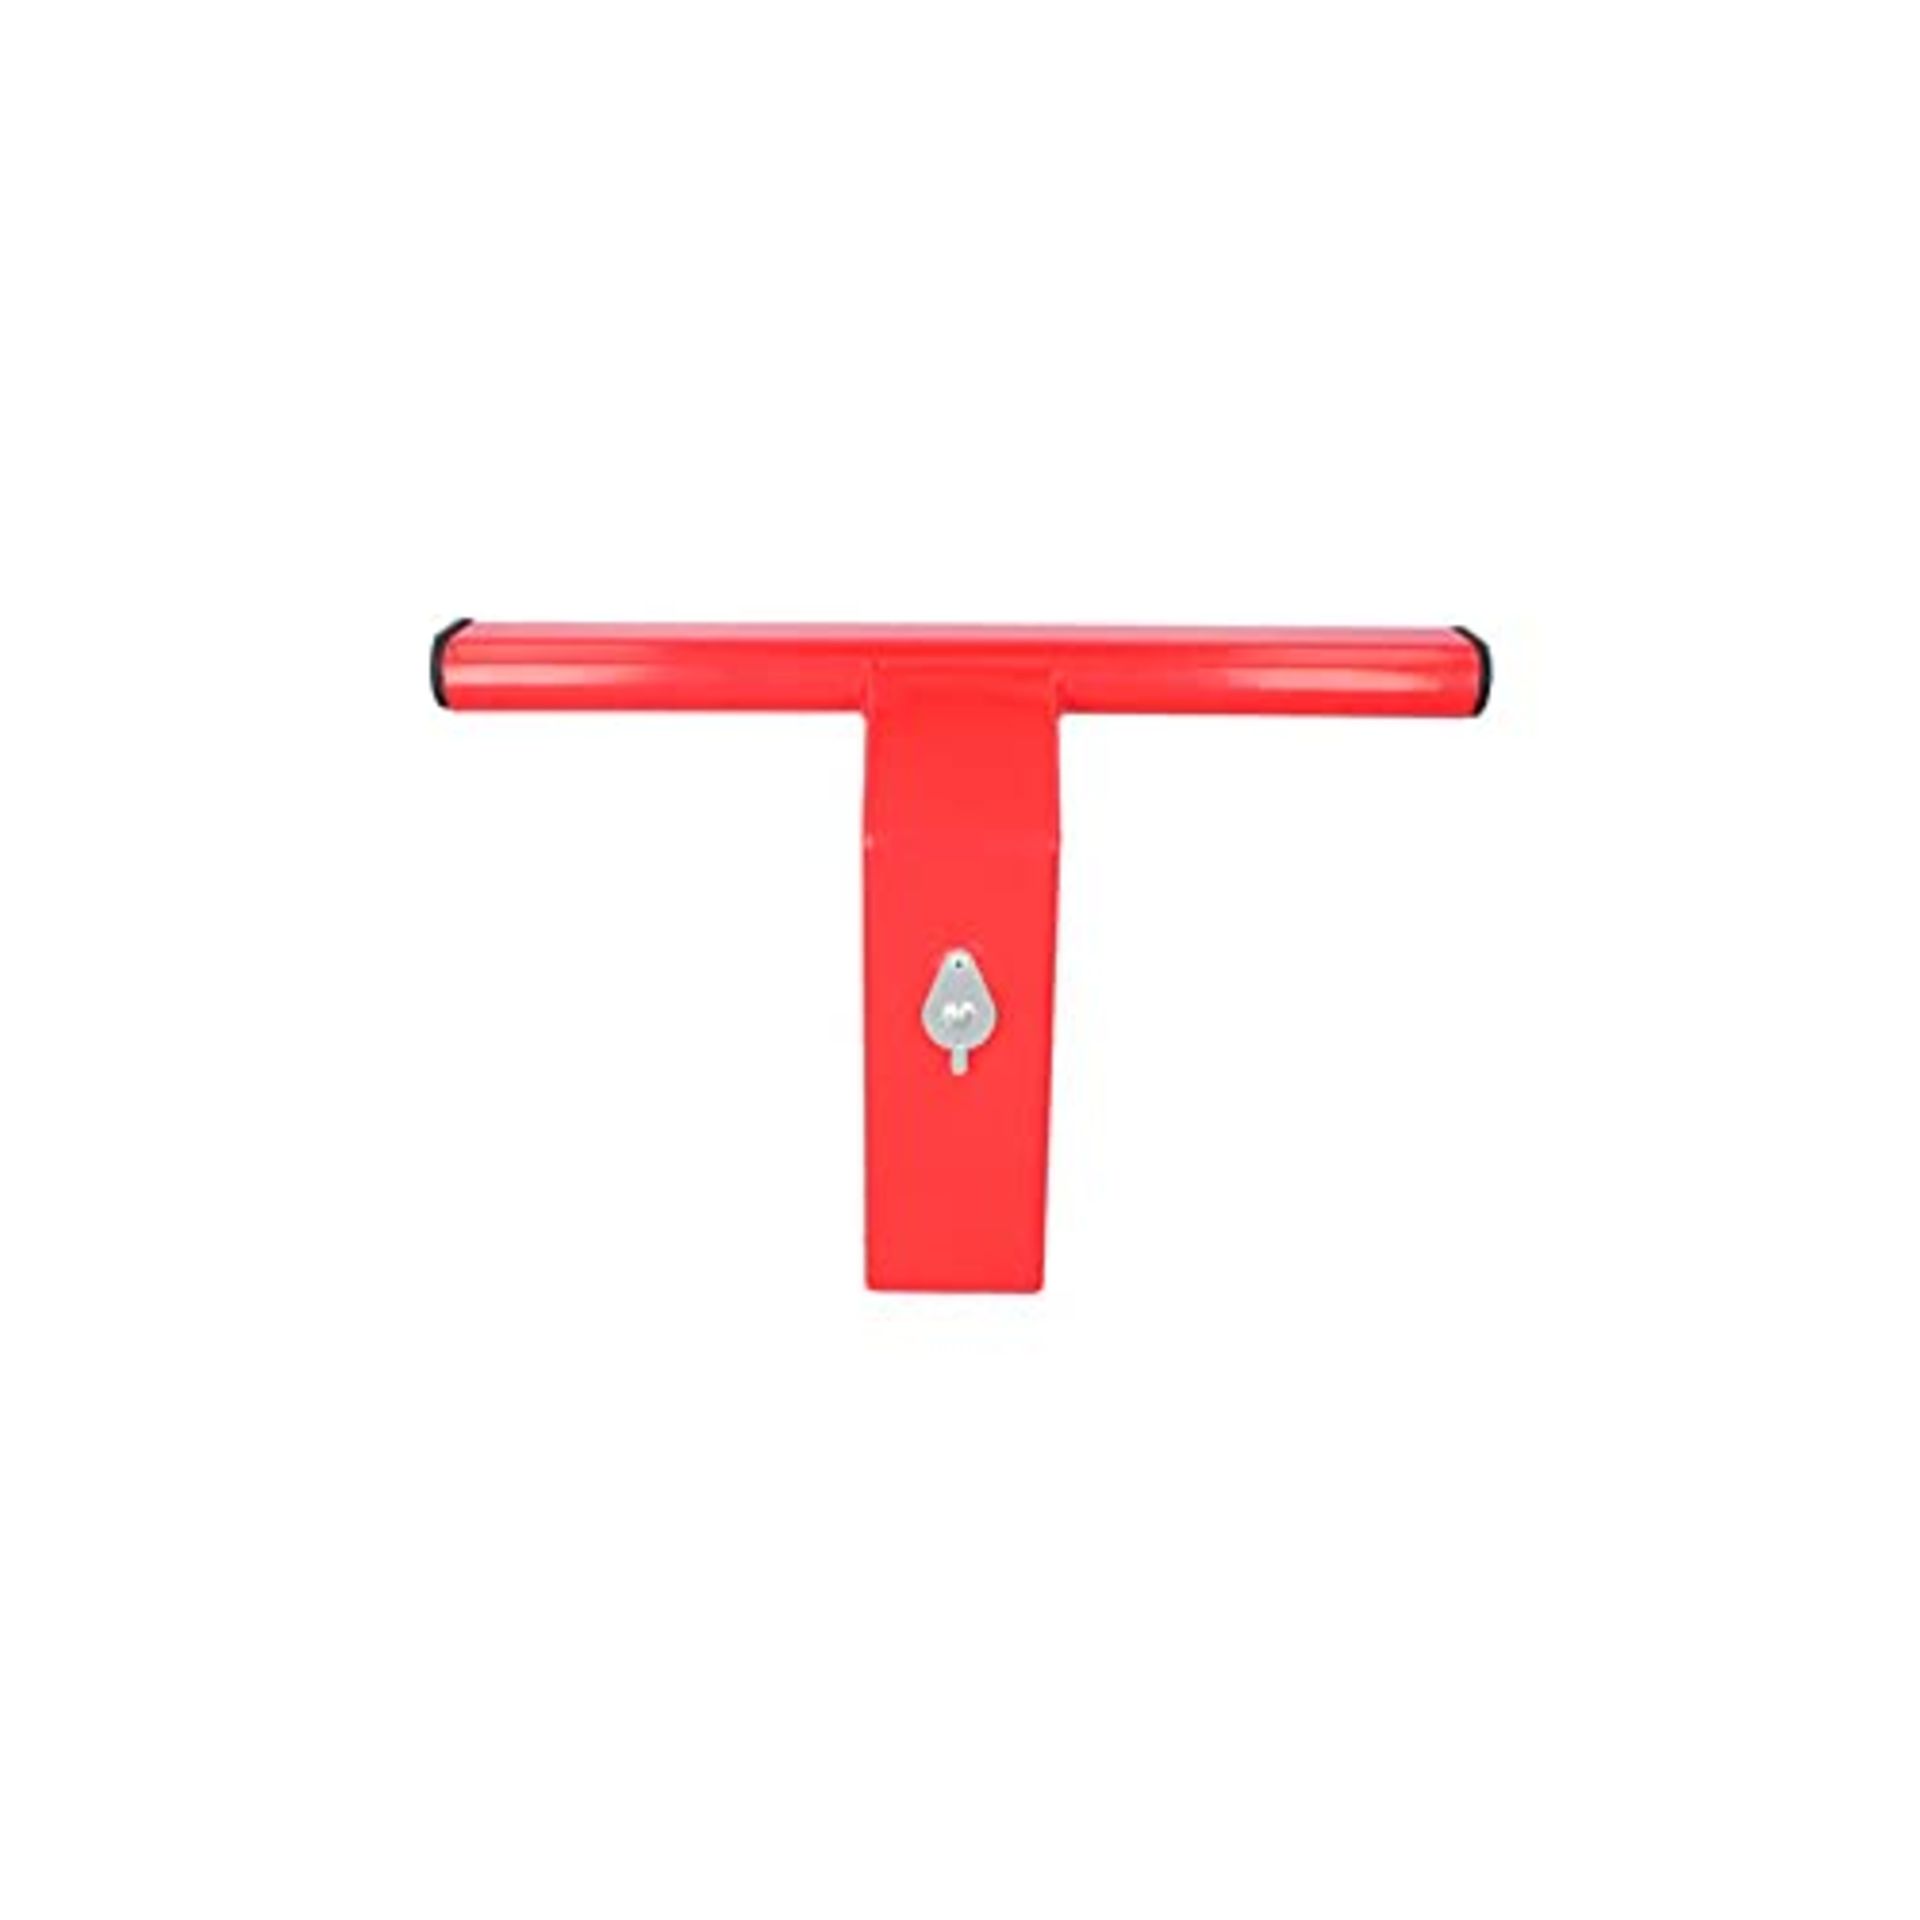 RRP £70.00 Carpoint Lock Trailer Hitch - Cargo Area Security, Red